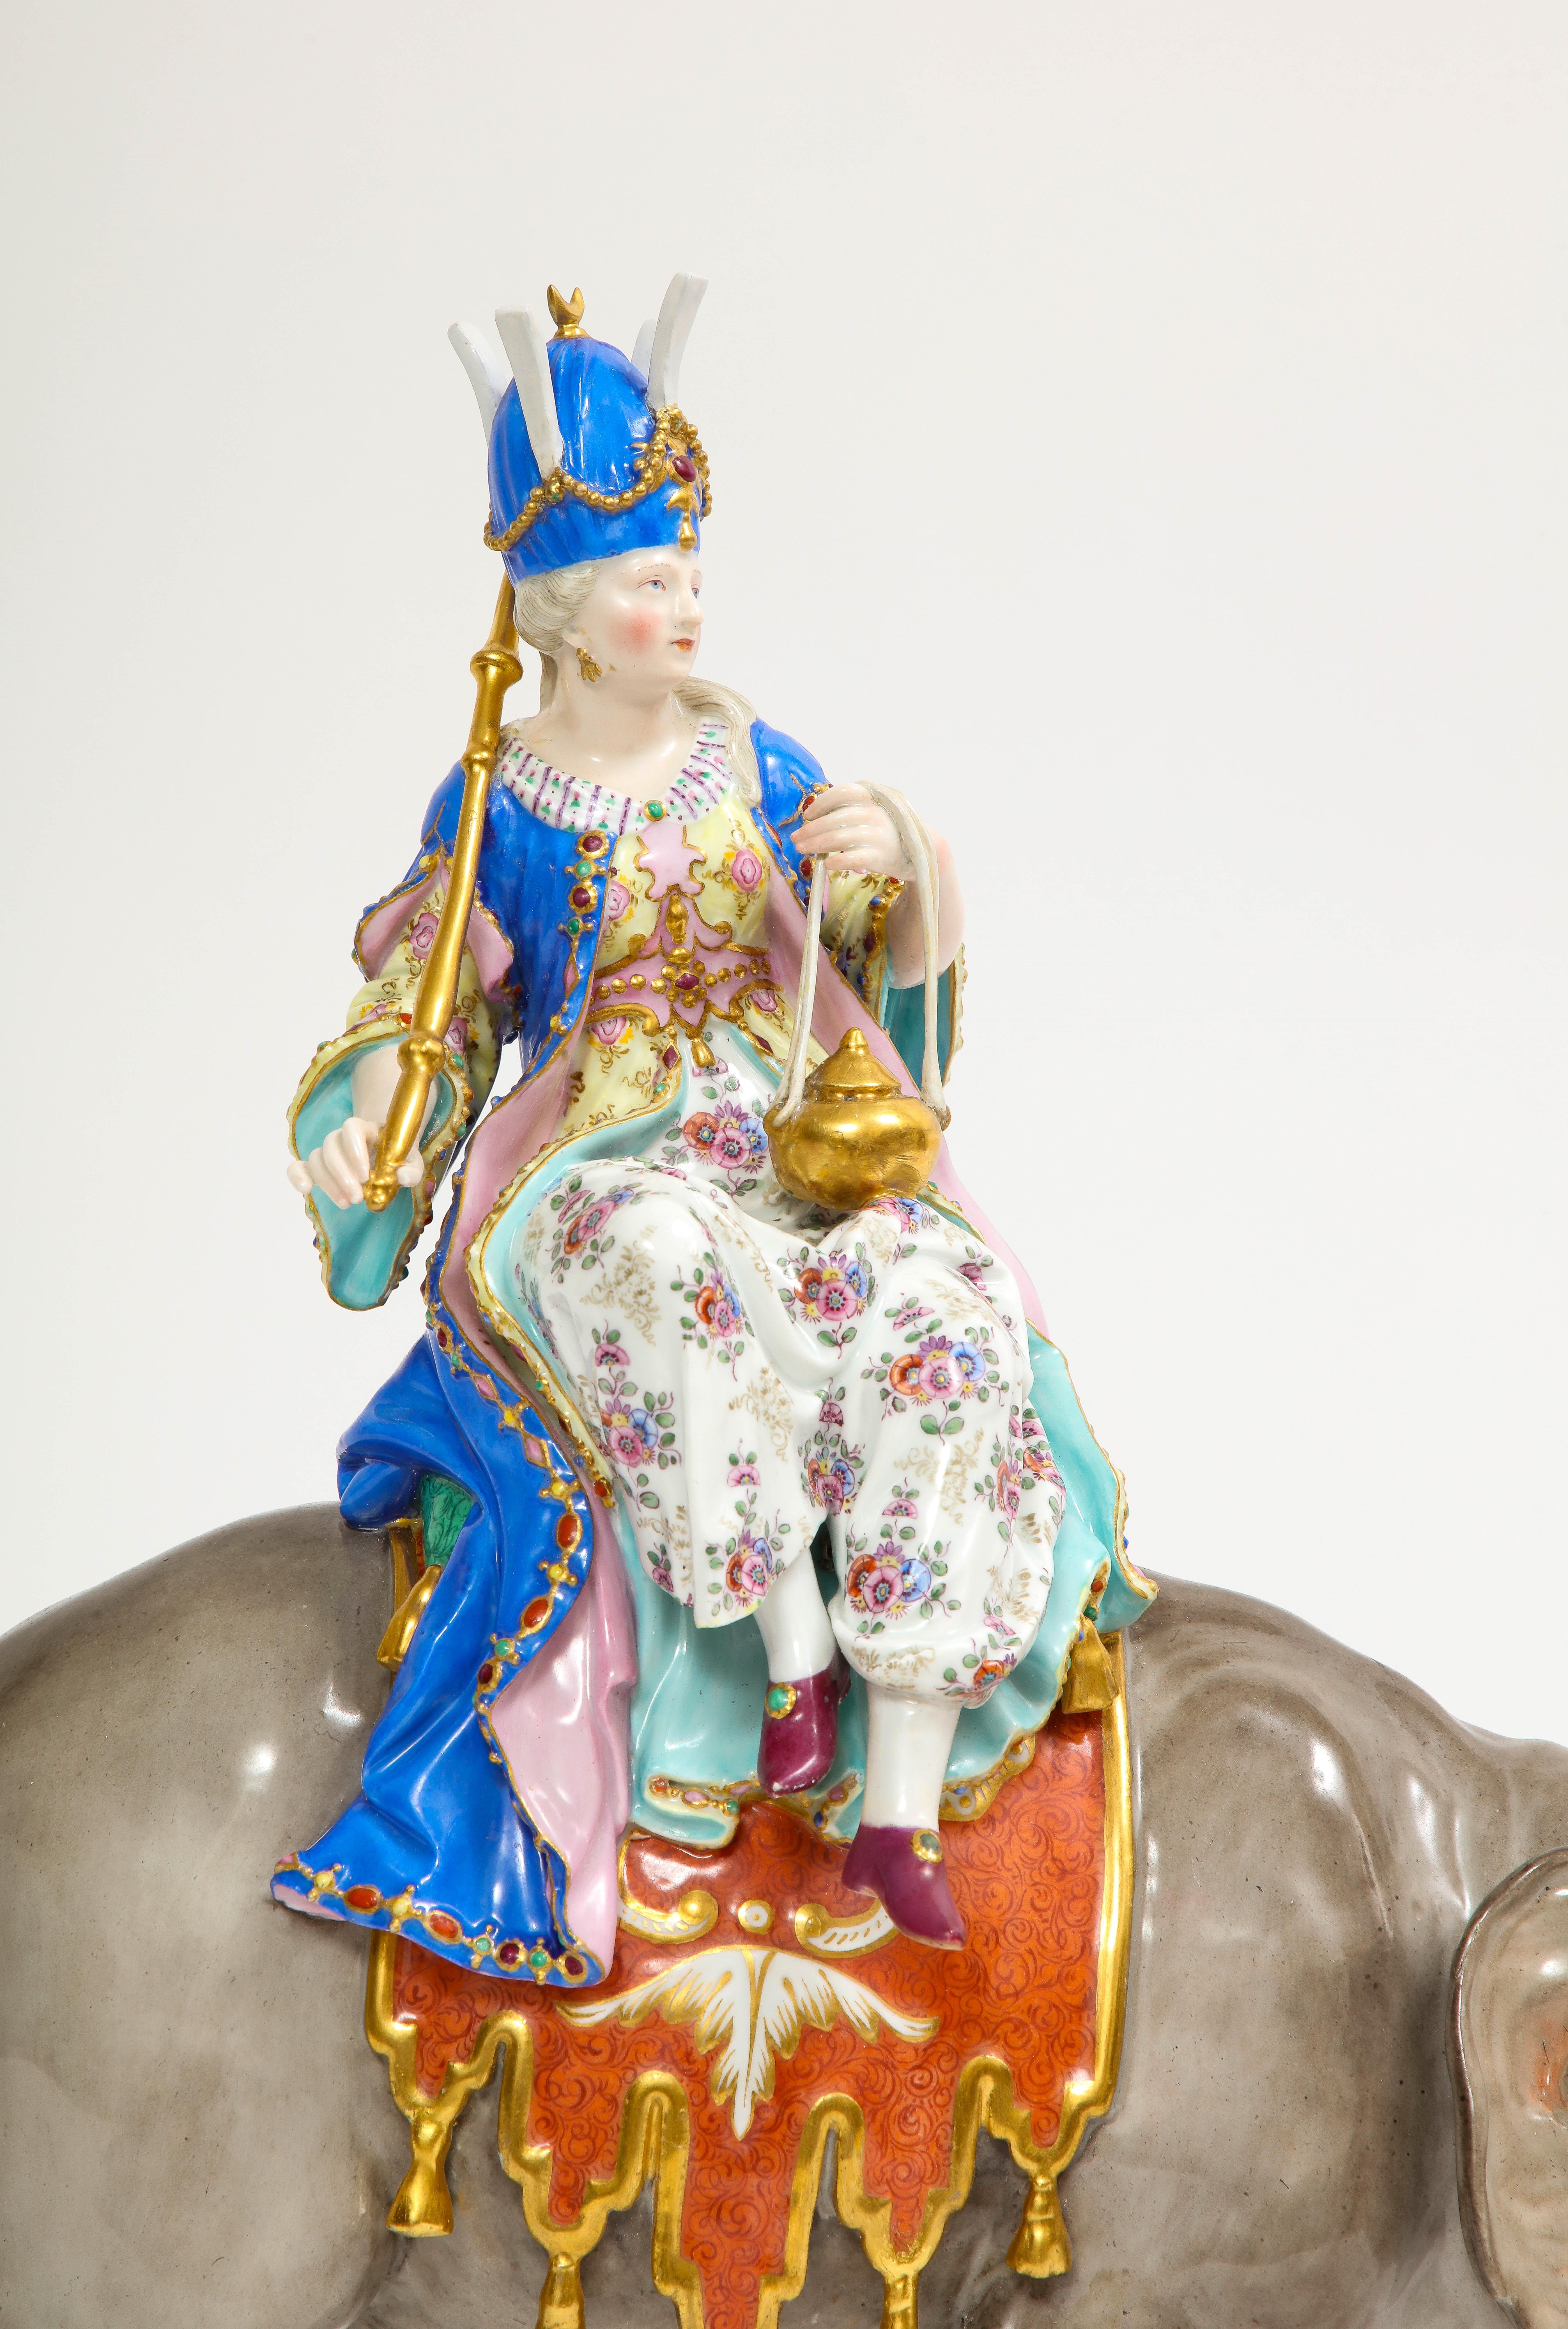 Hand-Carved 19th C. Meissen Porcelain Figure of a Sultana Riding an Elephant with a Crown For Sale